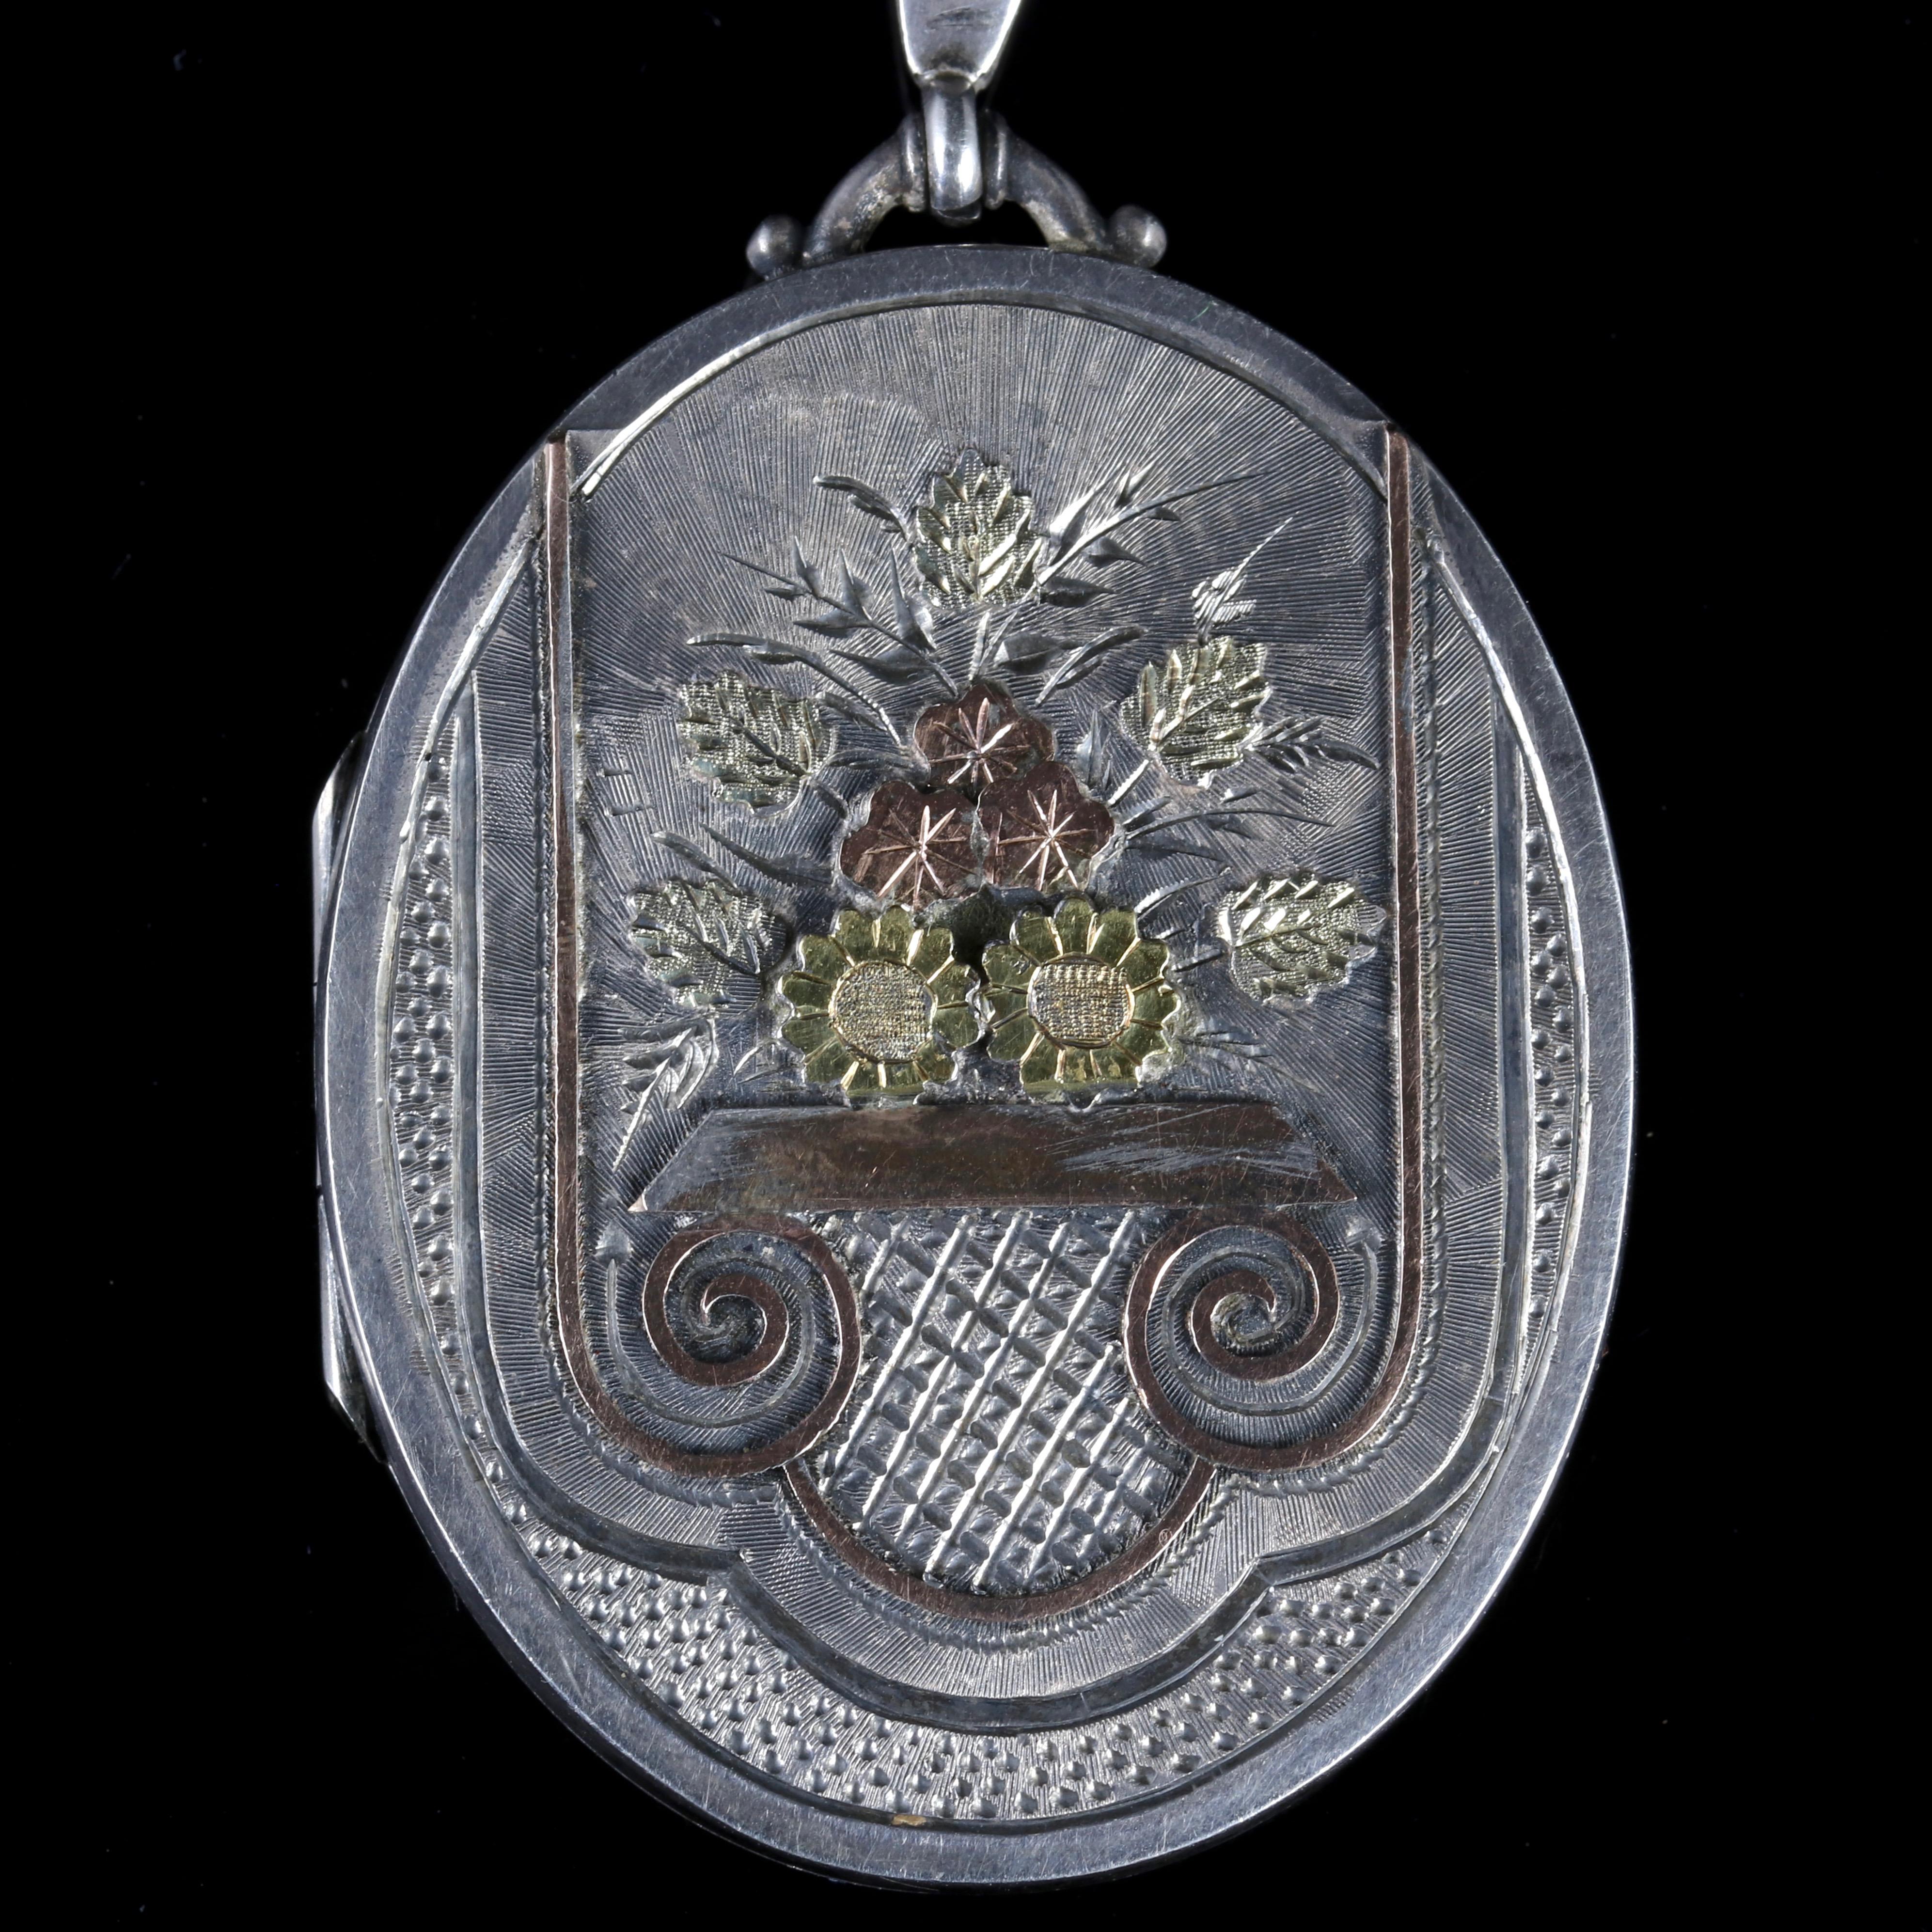 This beautiful Sterling Silver Victorian locket is dated Birmingham 1882.

The locket displays beautifully engraved Motifs set in 18ct Yellow Gold.

The locket opens and shuts securely.

Full hallmarked Birmingham 1882 makers initials are W & Co,